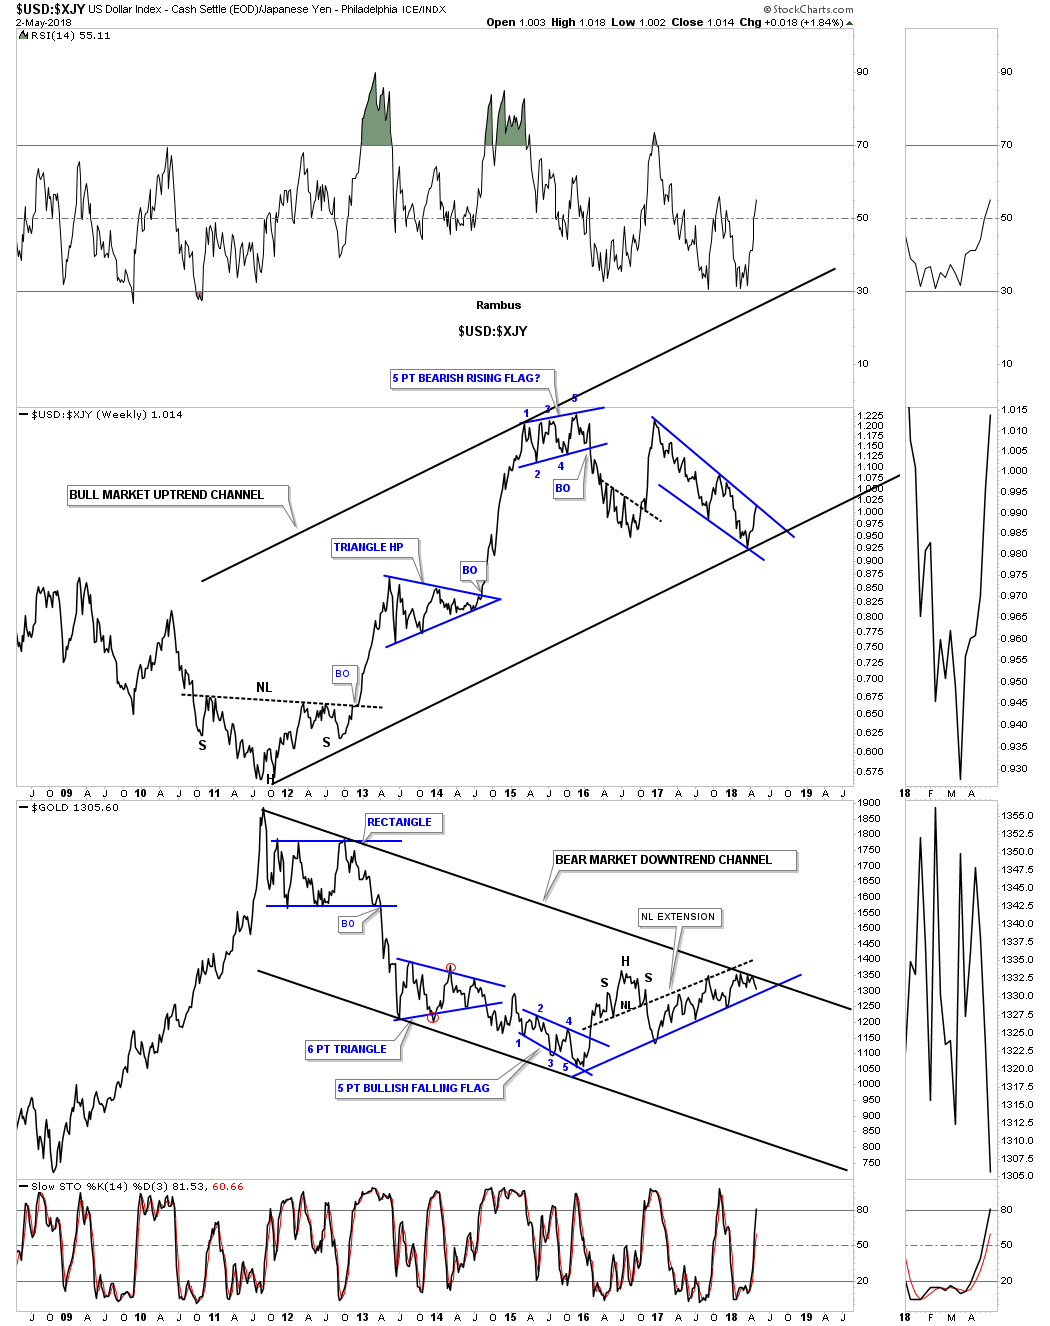 Weekly USD:XJY vs Gold Weekly 2008-2018